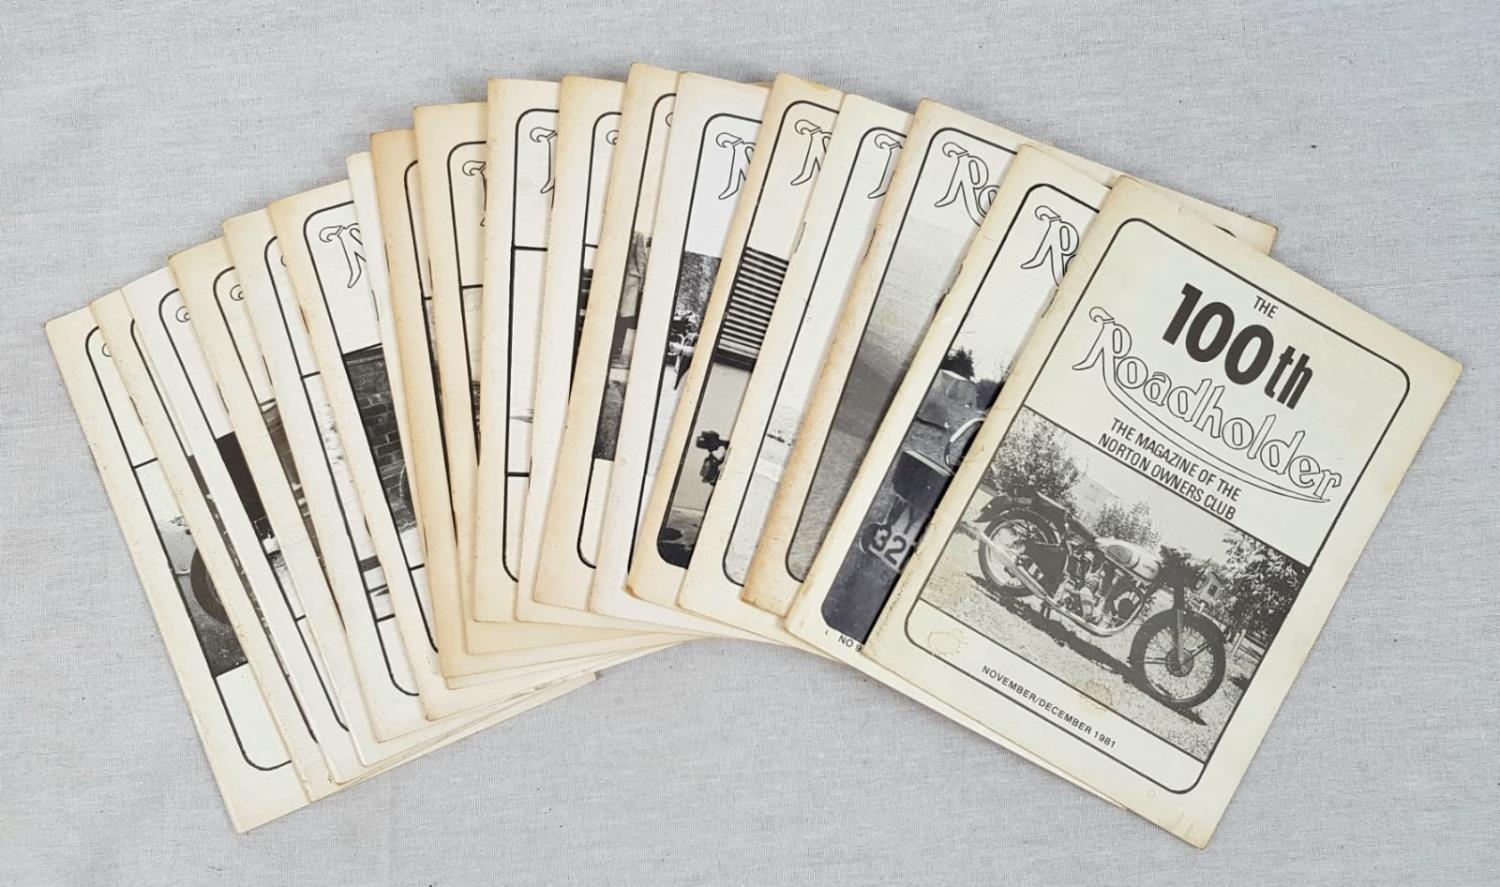 18 Editions of Roadholder - Norton Owners Magazine. 1980,81 and 82 editions. Good condition. - Image 2 of 4